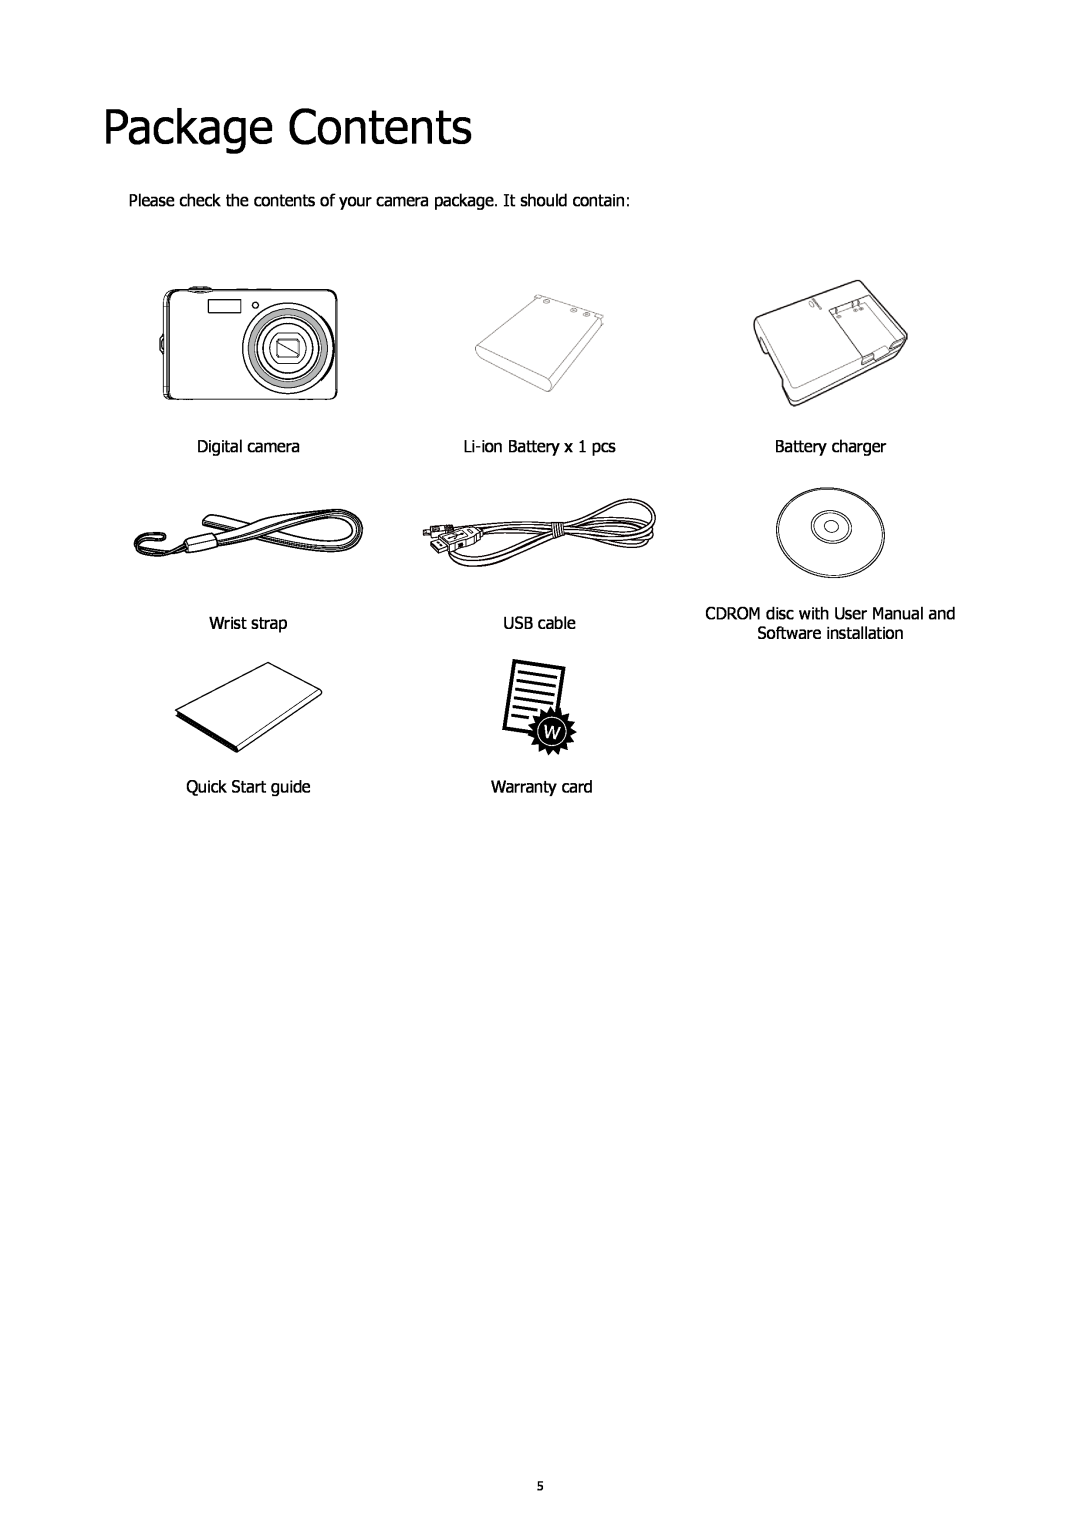 HP SW450 Package Contents, Please check the contents of your camera package. It should contain, Digital camera, USB cable 